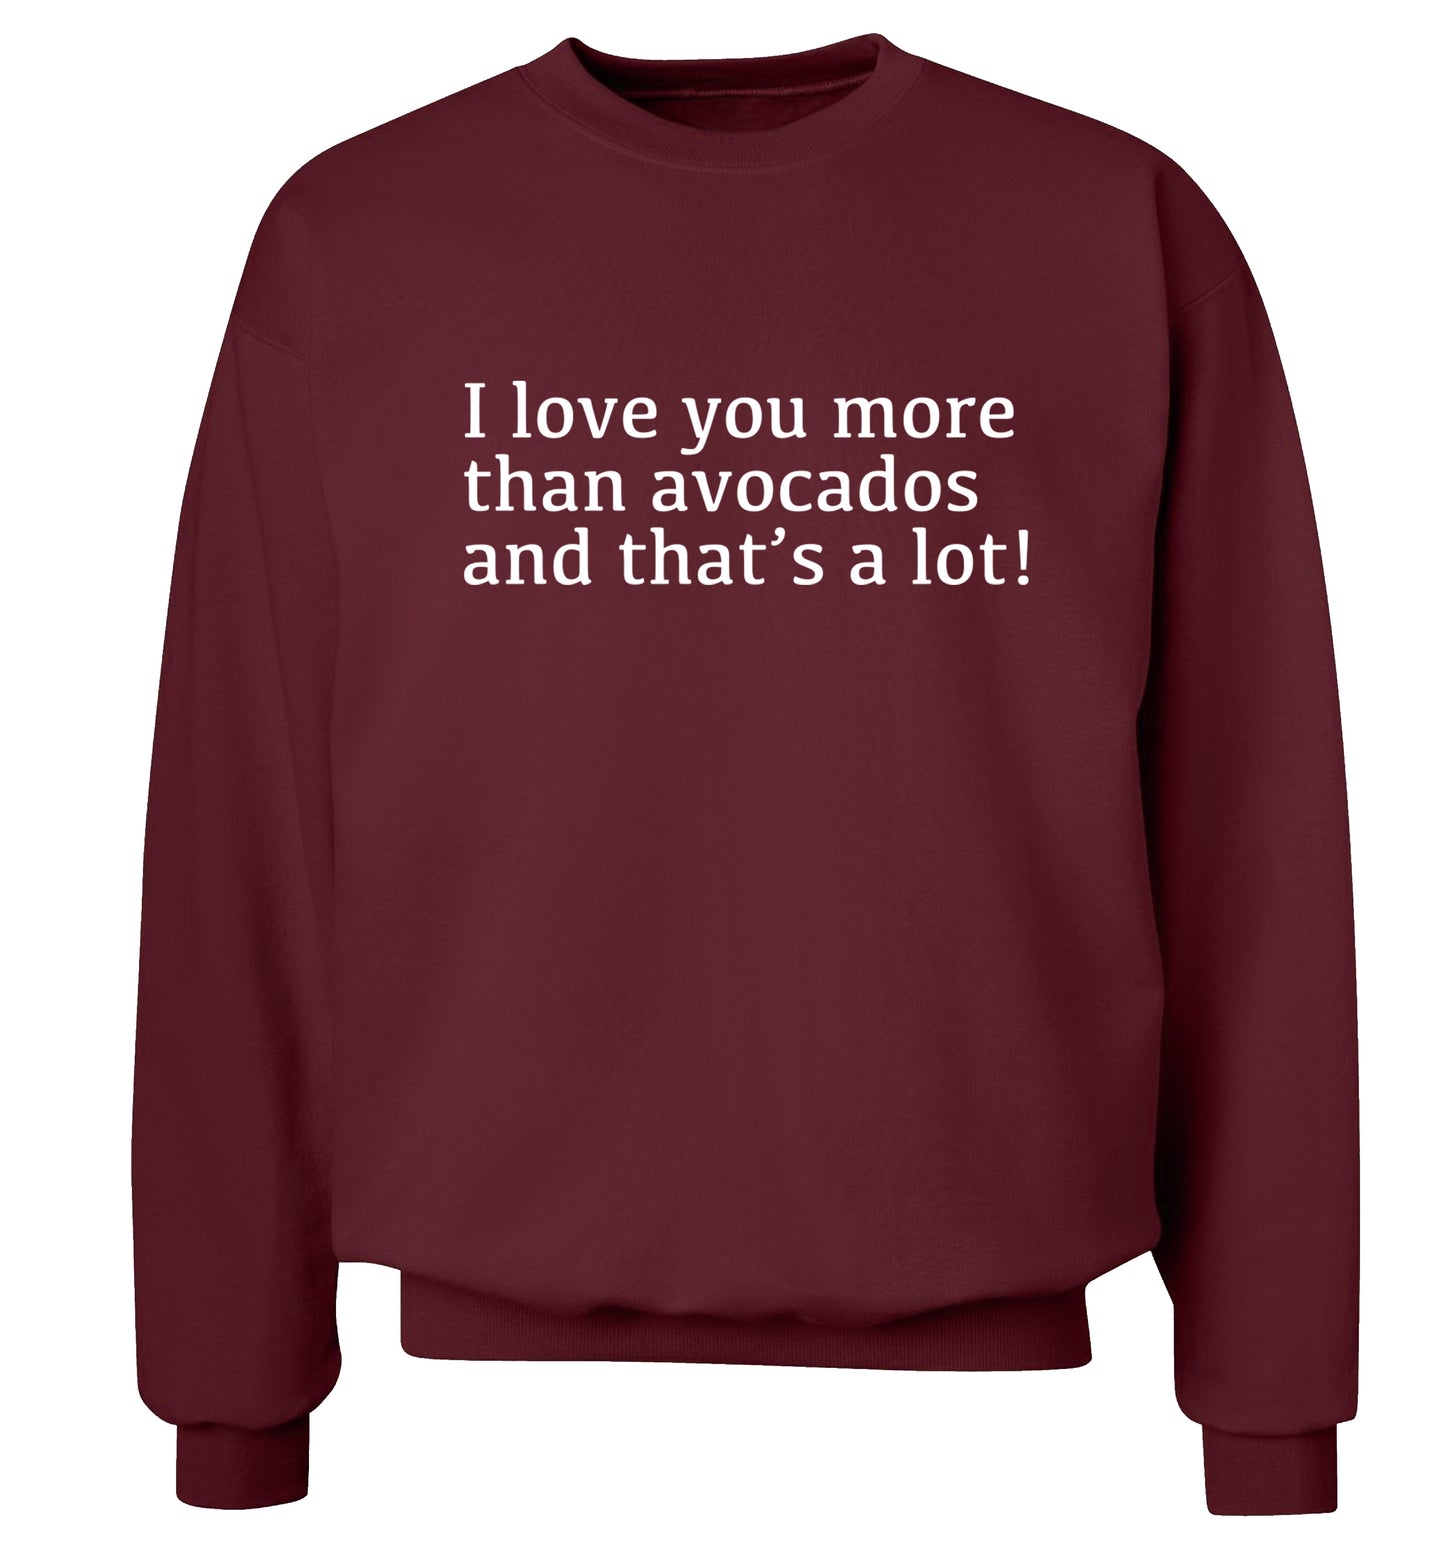 I love you more than avocados and that's a lot Adult's unisex maroon Sweater 2XL